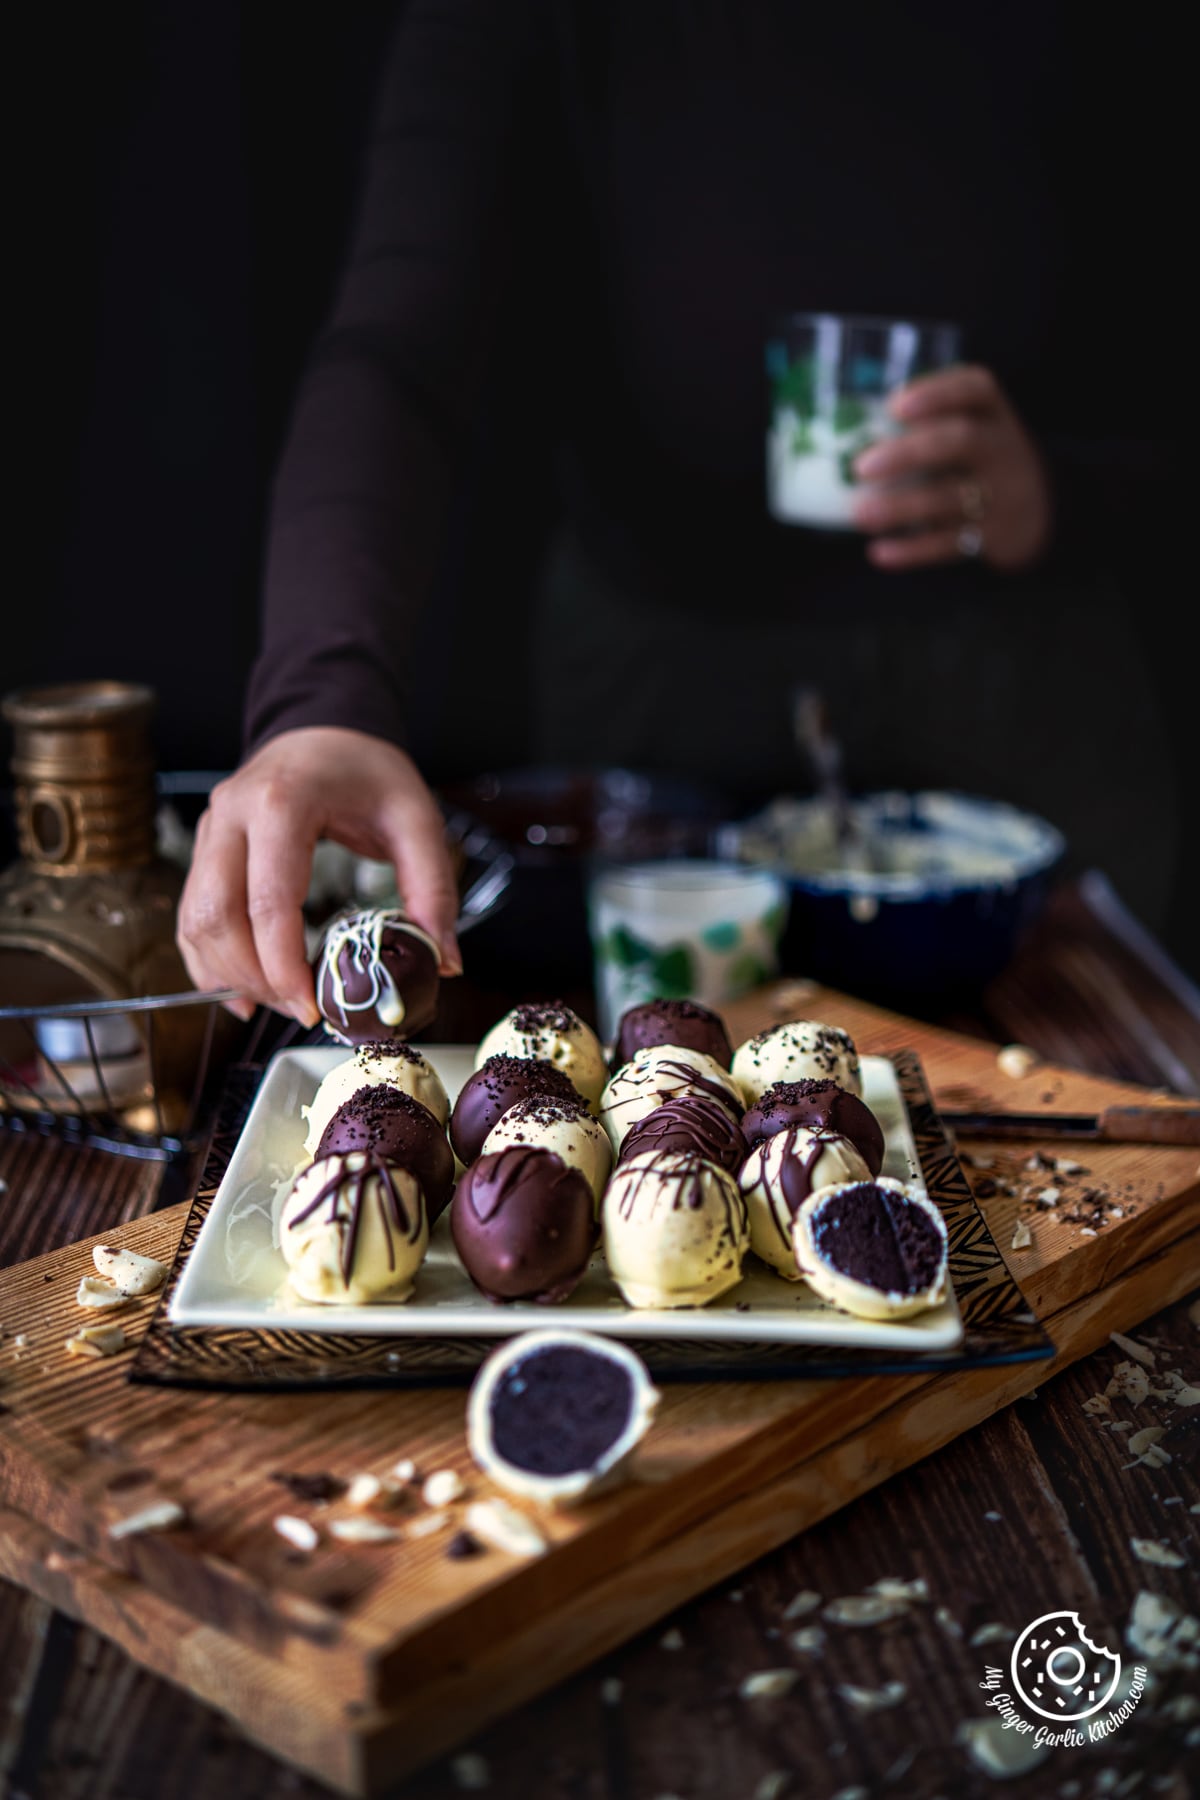 oreo truffles coated in chocolate on a yellow square plate a hand holding one truffle